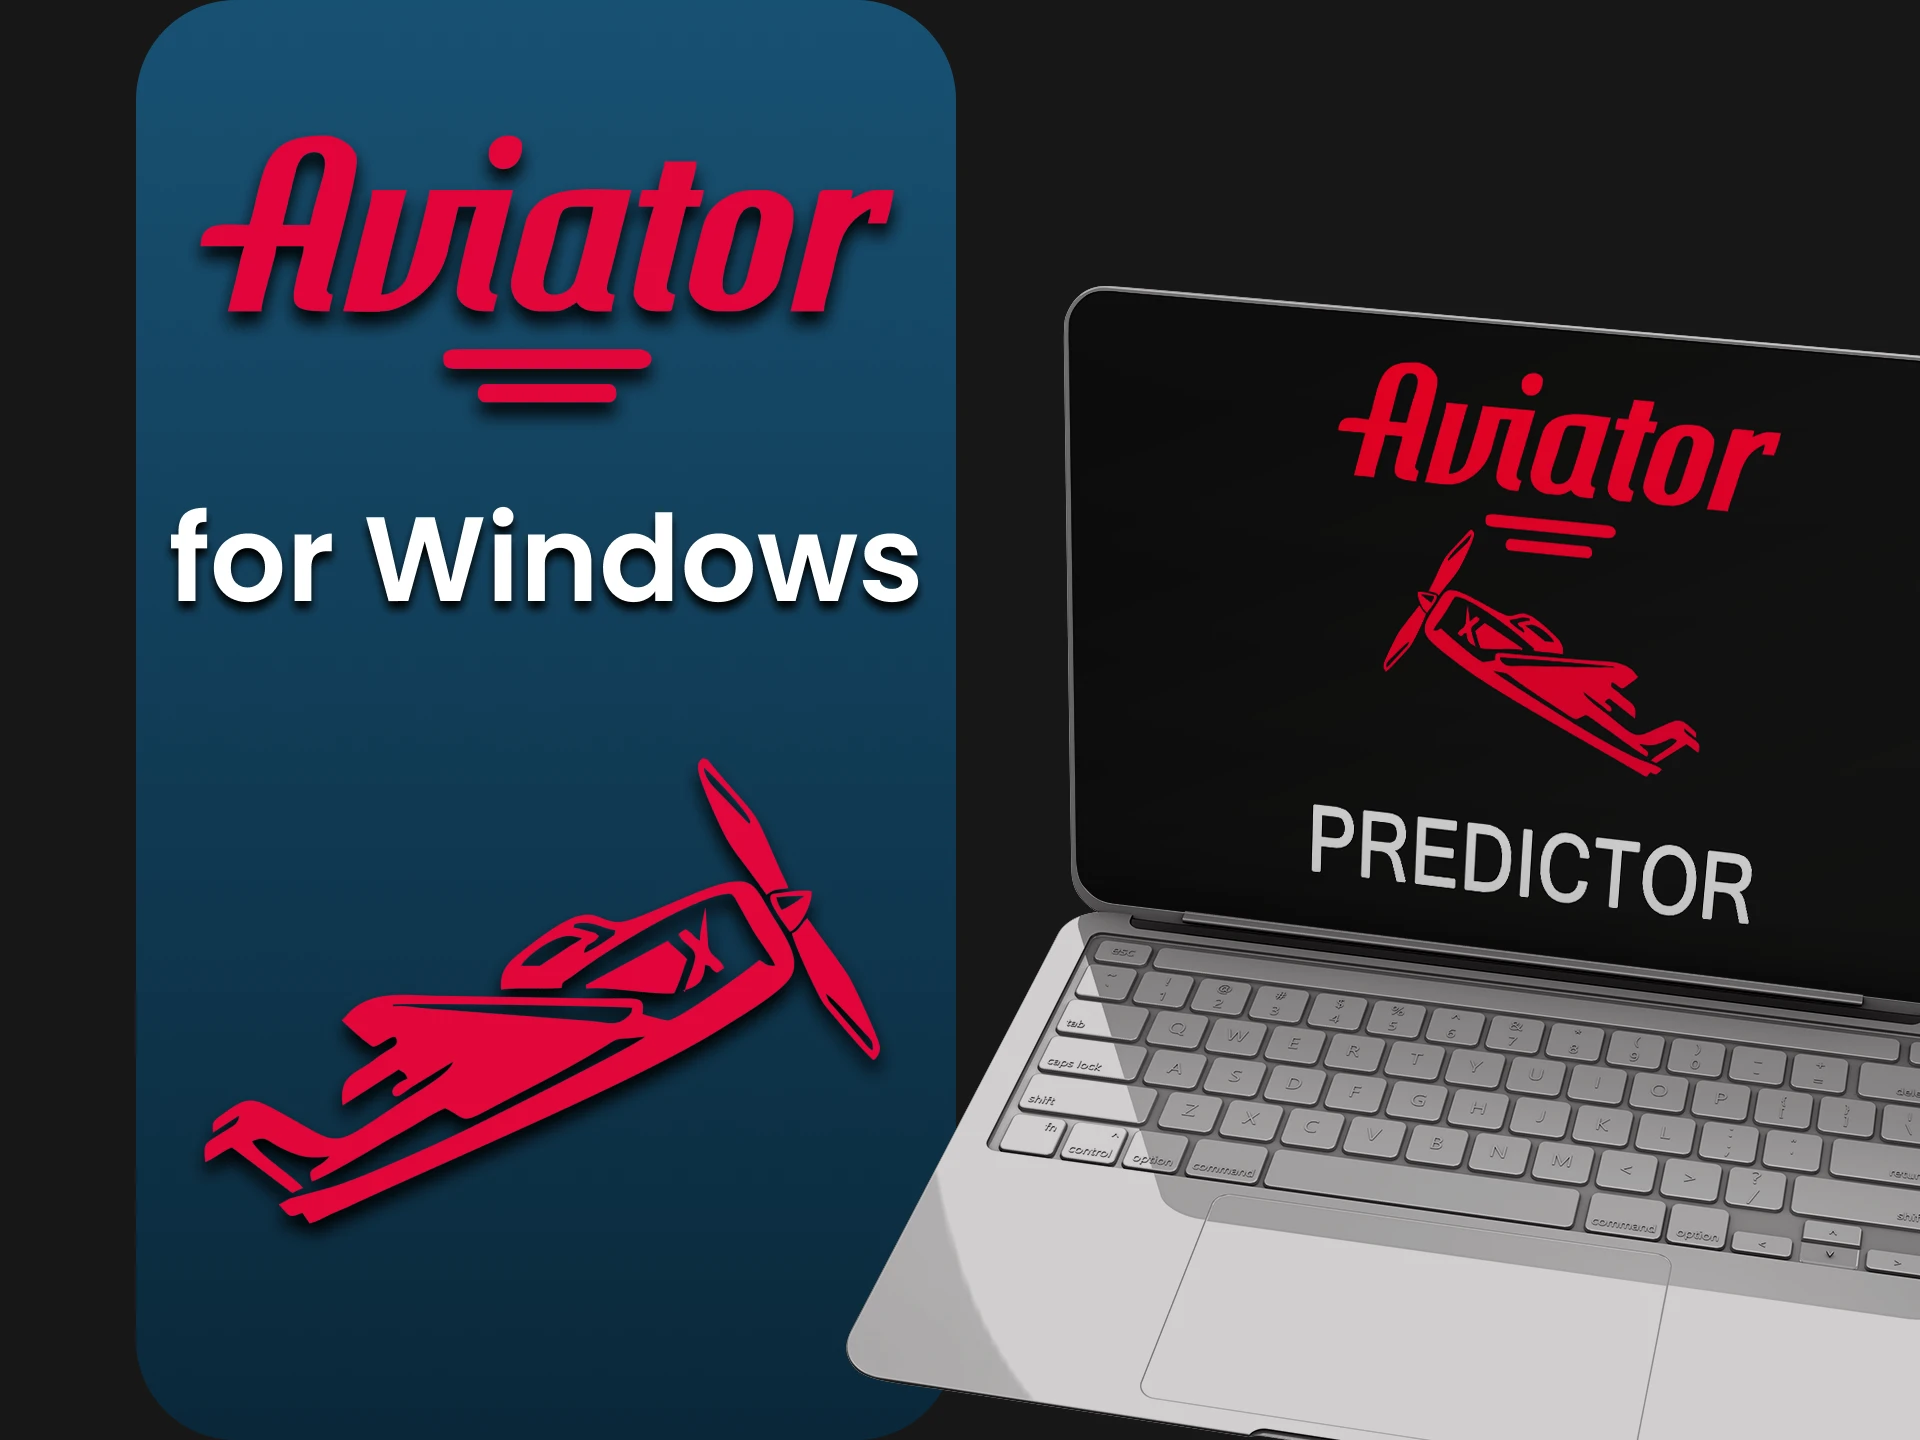 We will talk about Predictor for Aviator on Windows.